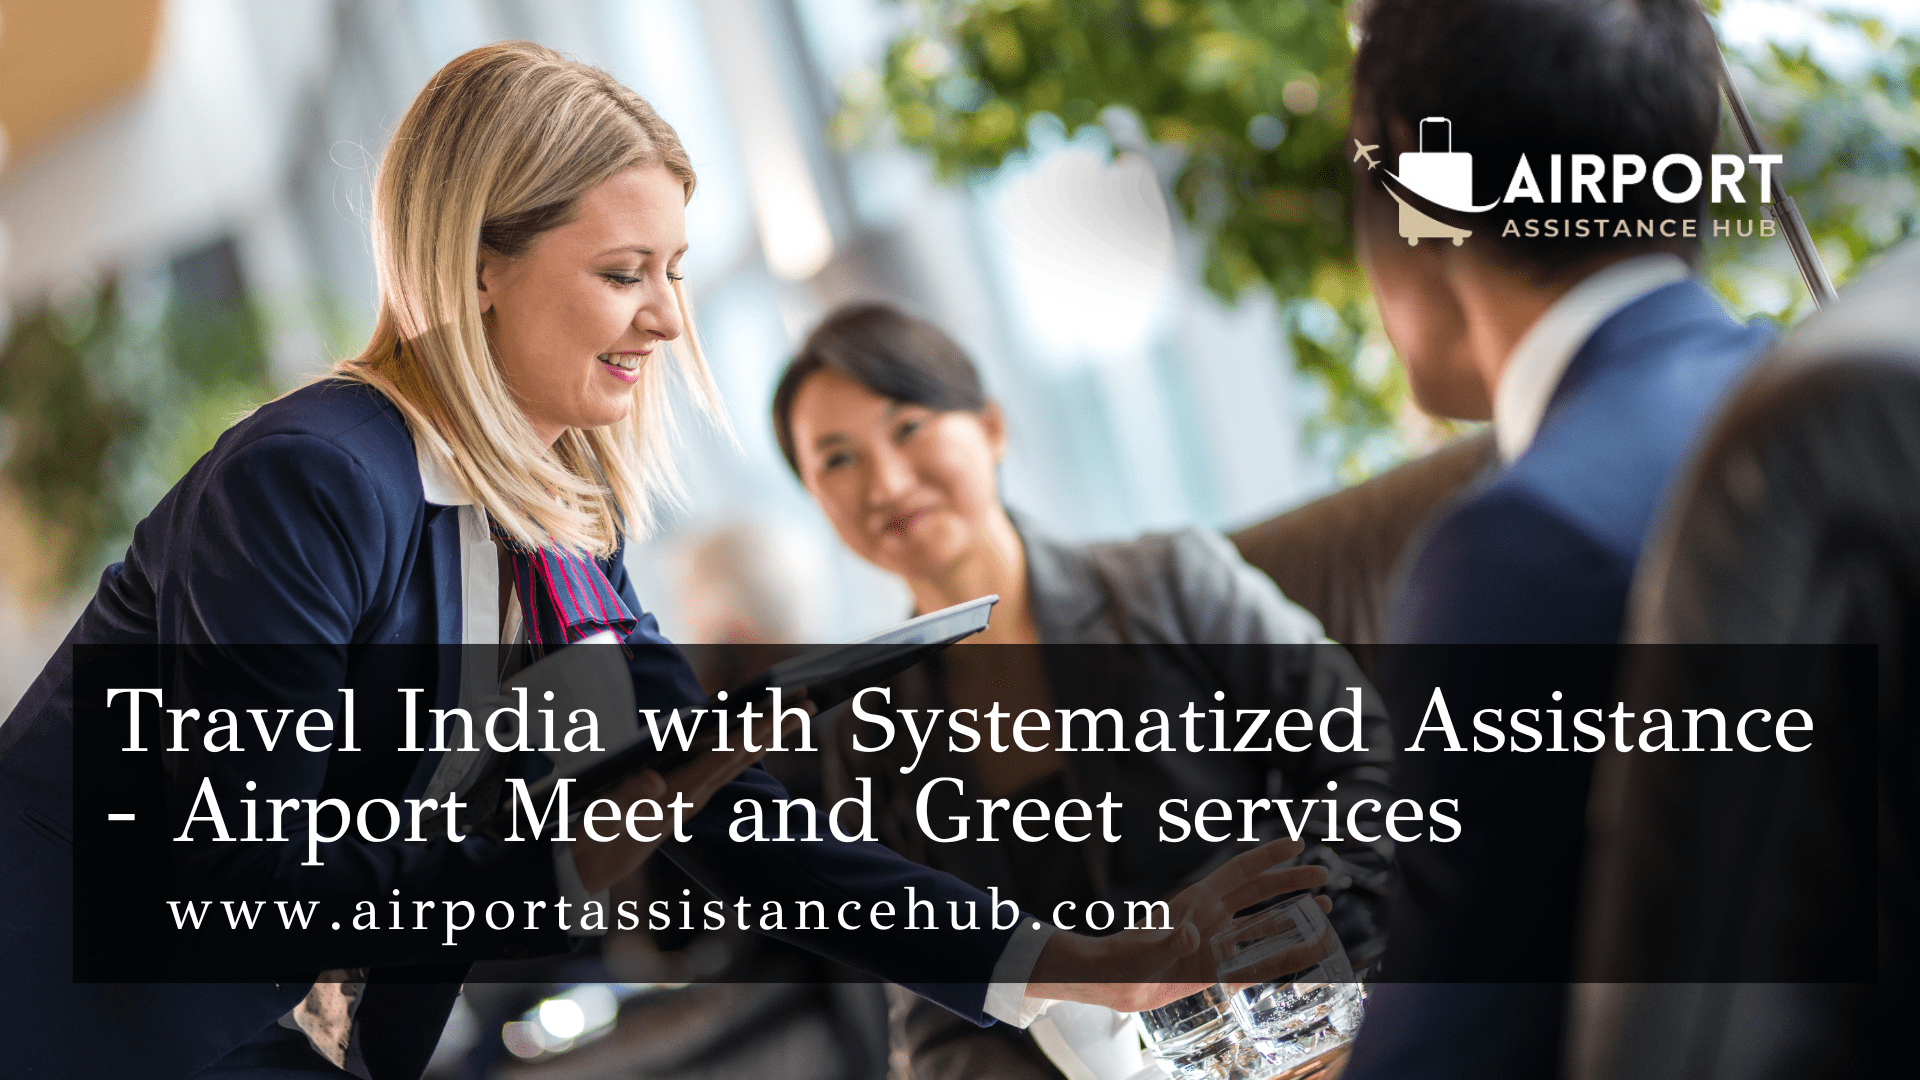 Travel India with Systematized Assistance – Airport Meet and Greet Services